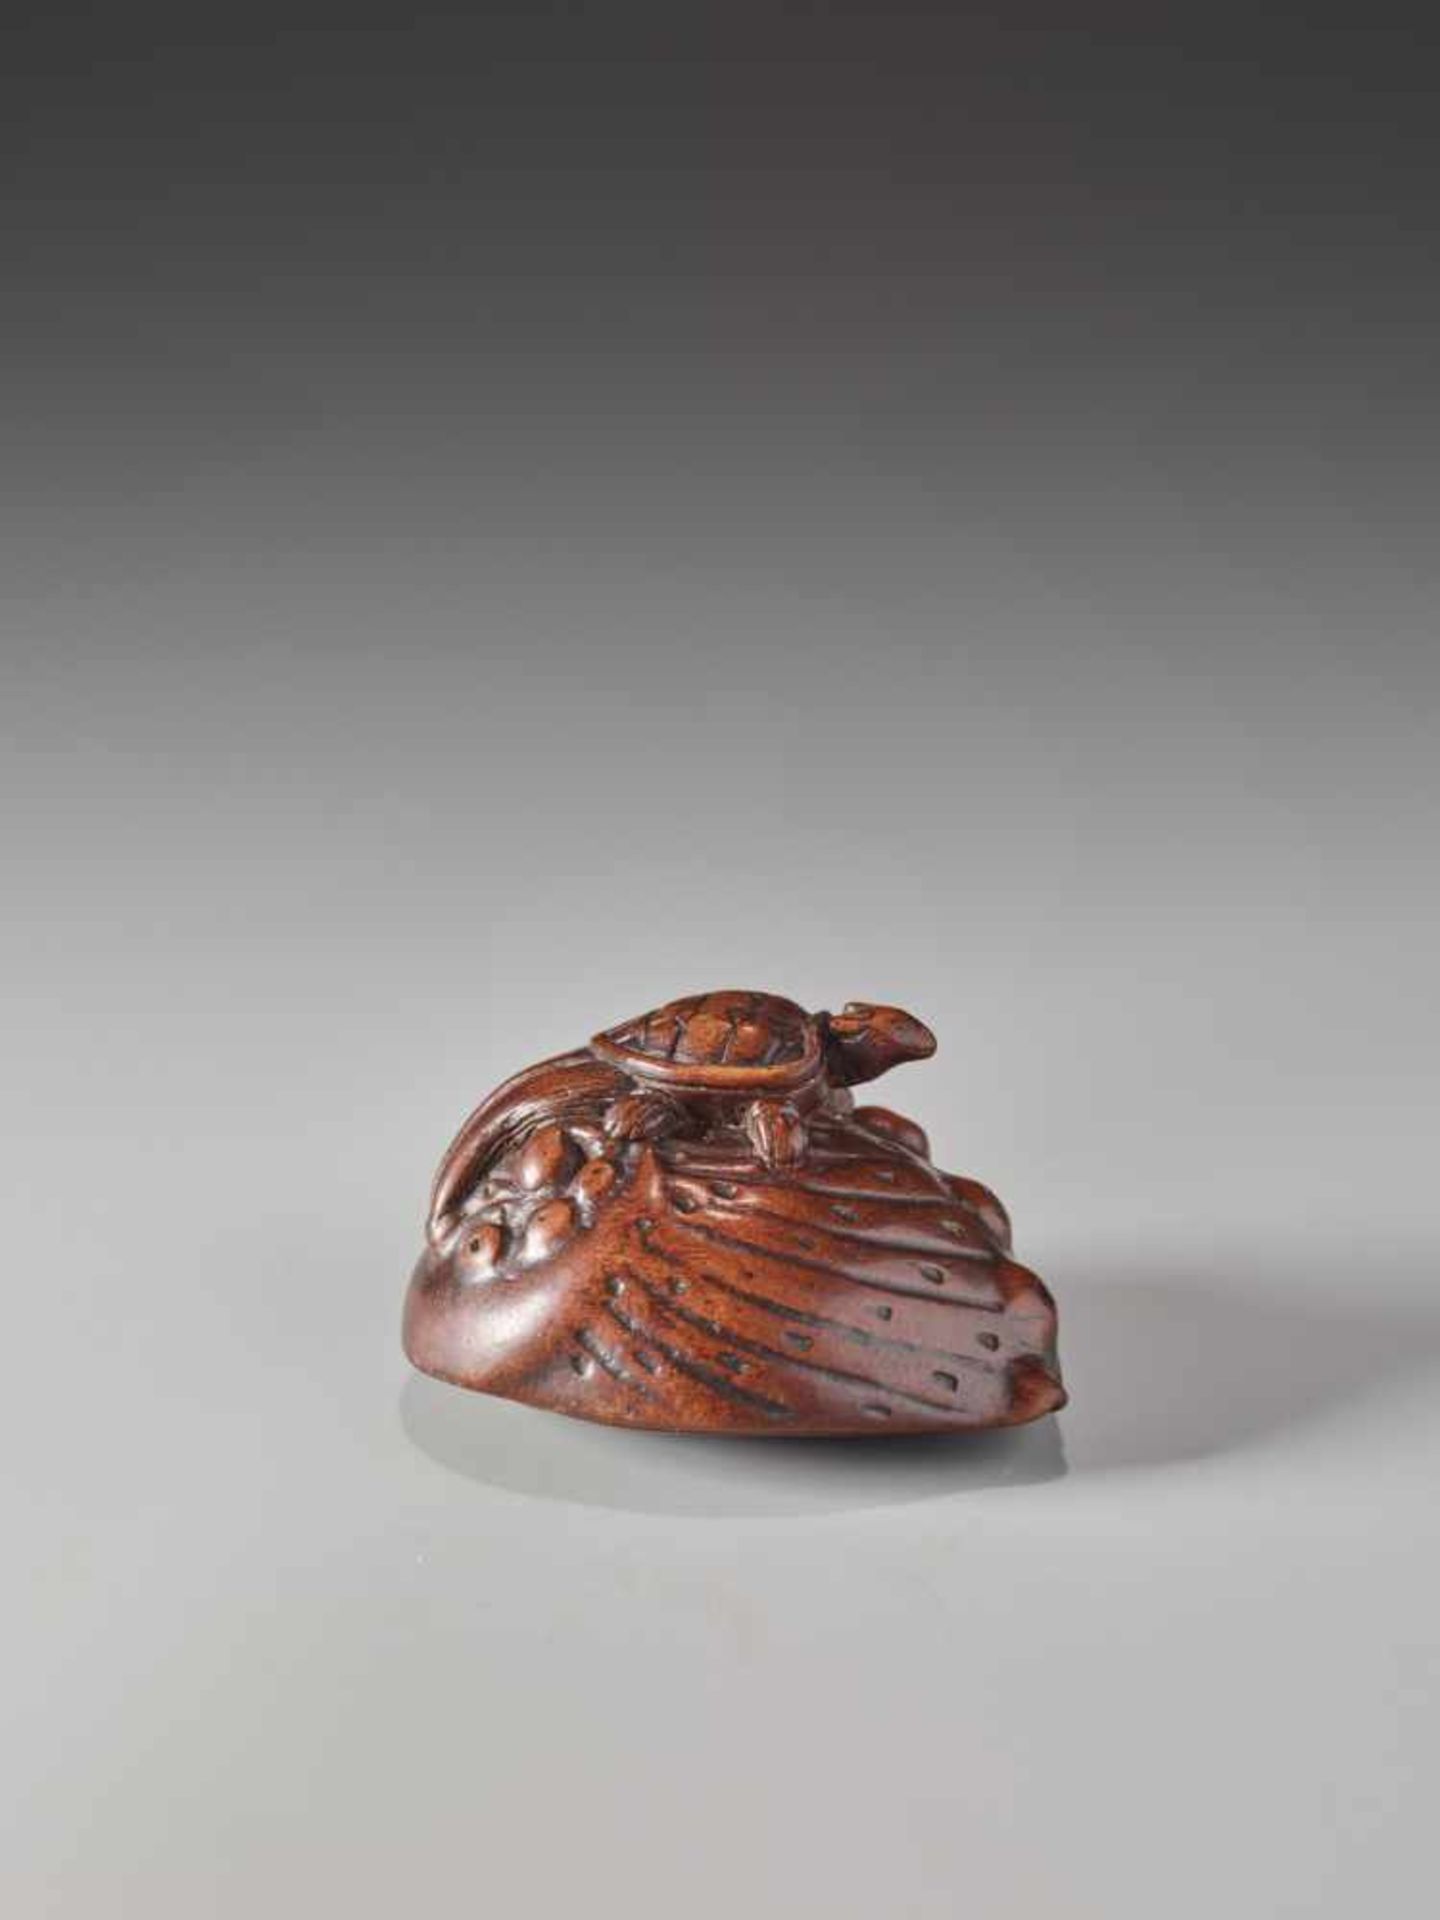 A WOOD NETSUKE OF A MINOGAME ON AN AWABIWood netsukeJapanlate 18th to 1st half of 19th century, - Image 6 of 7